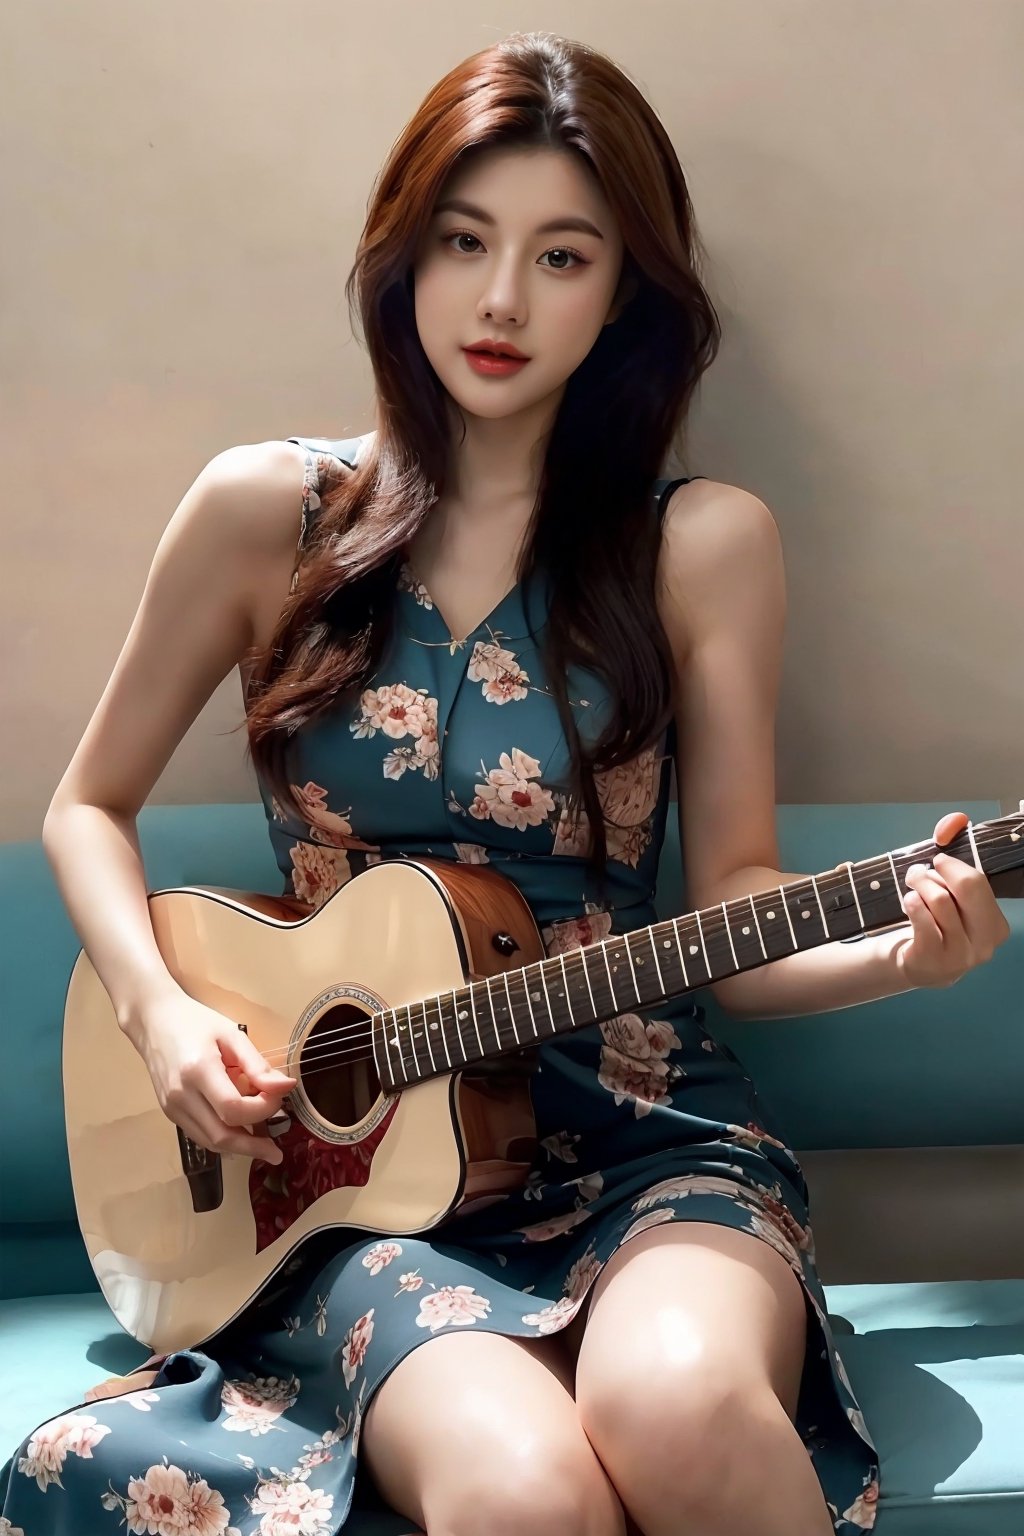 High Definition, 8K Ultra HD, Express a beautiful girl sitting on a bench and playing guitar, floral nashi-shaped dress. sexy, 